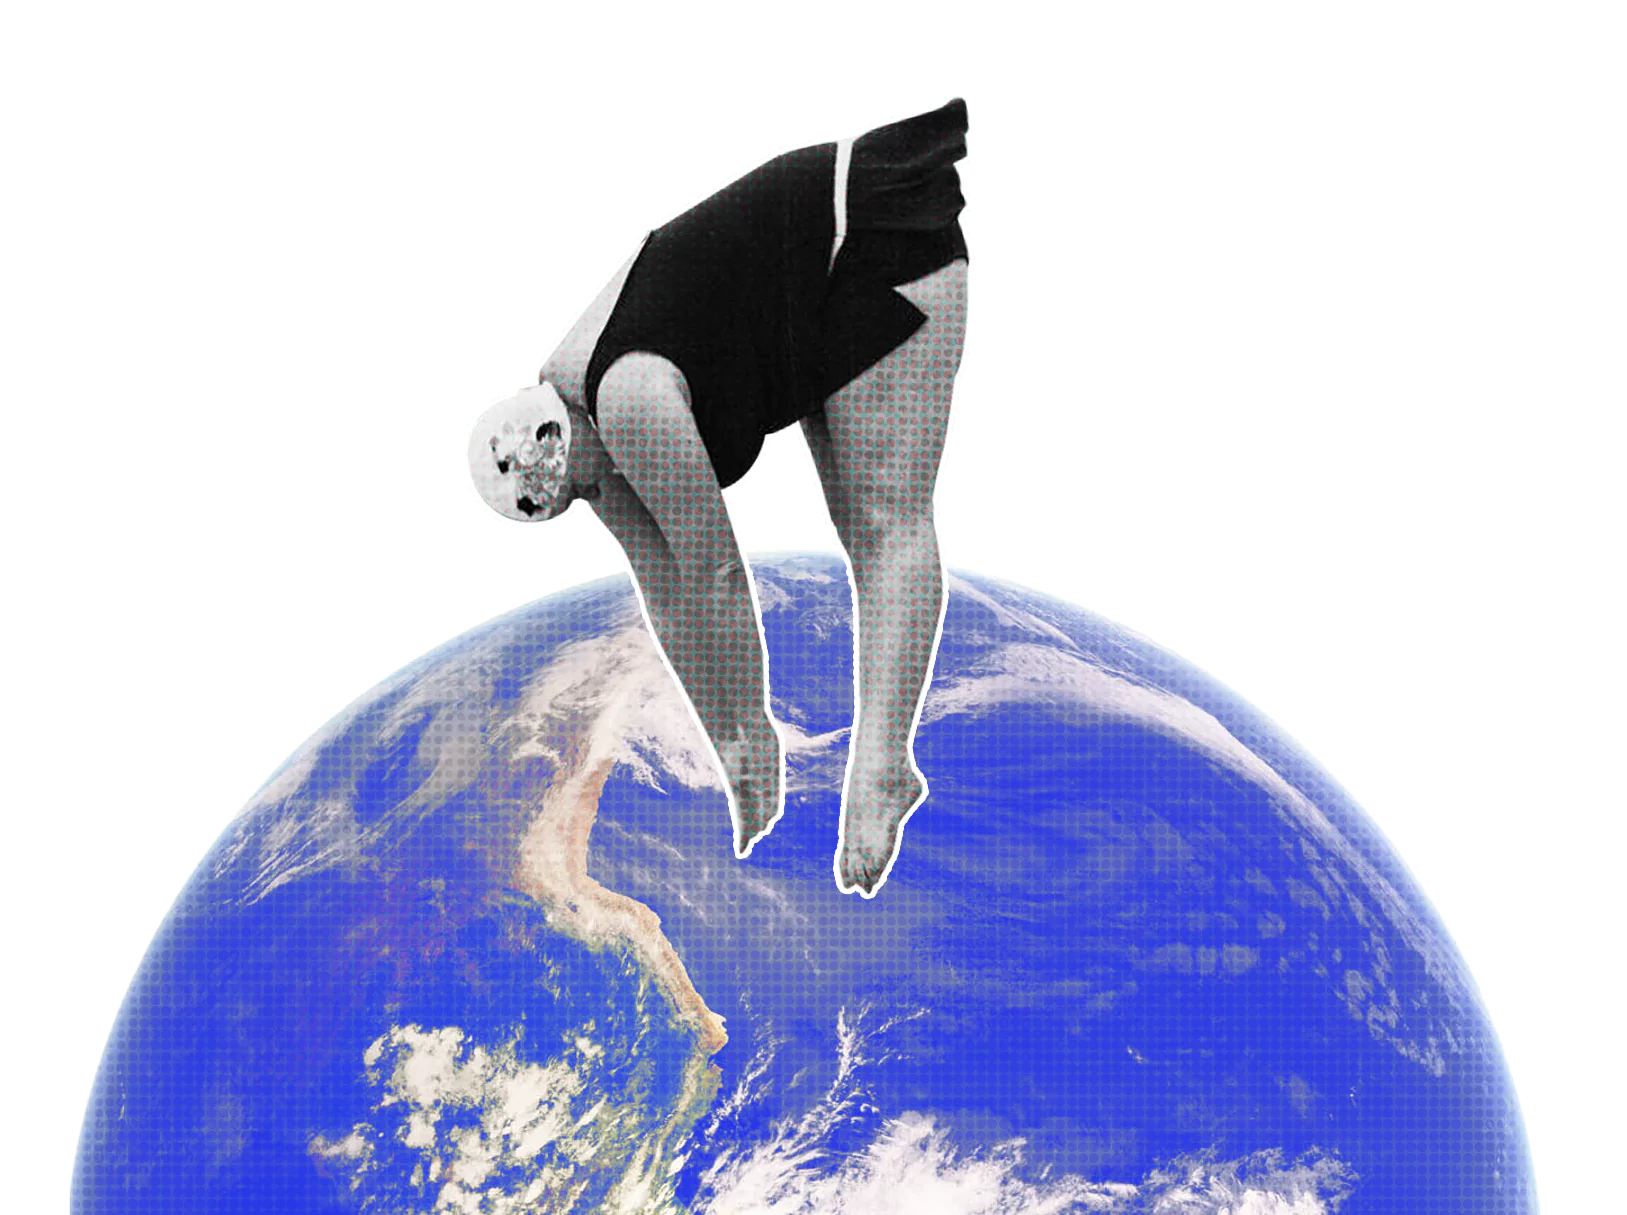 Someone dressed in an old fashioned bathing suit for woman, diving back down to planet Earth. This juxta-positioned imagery creates a strong visual impact.